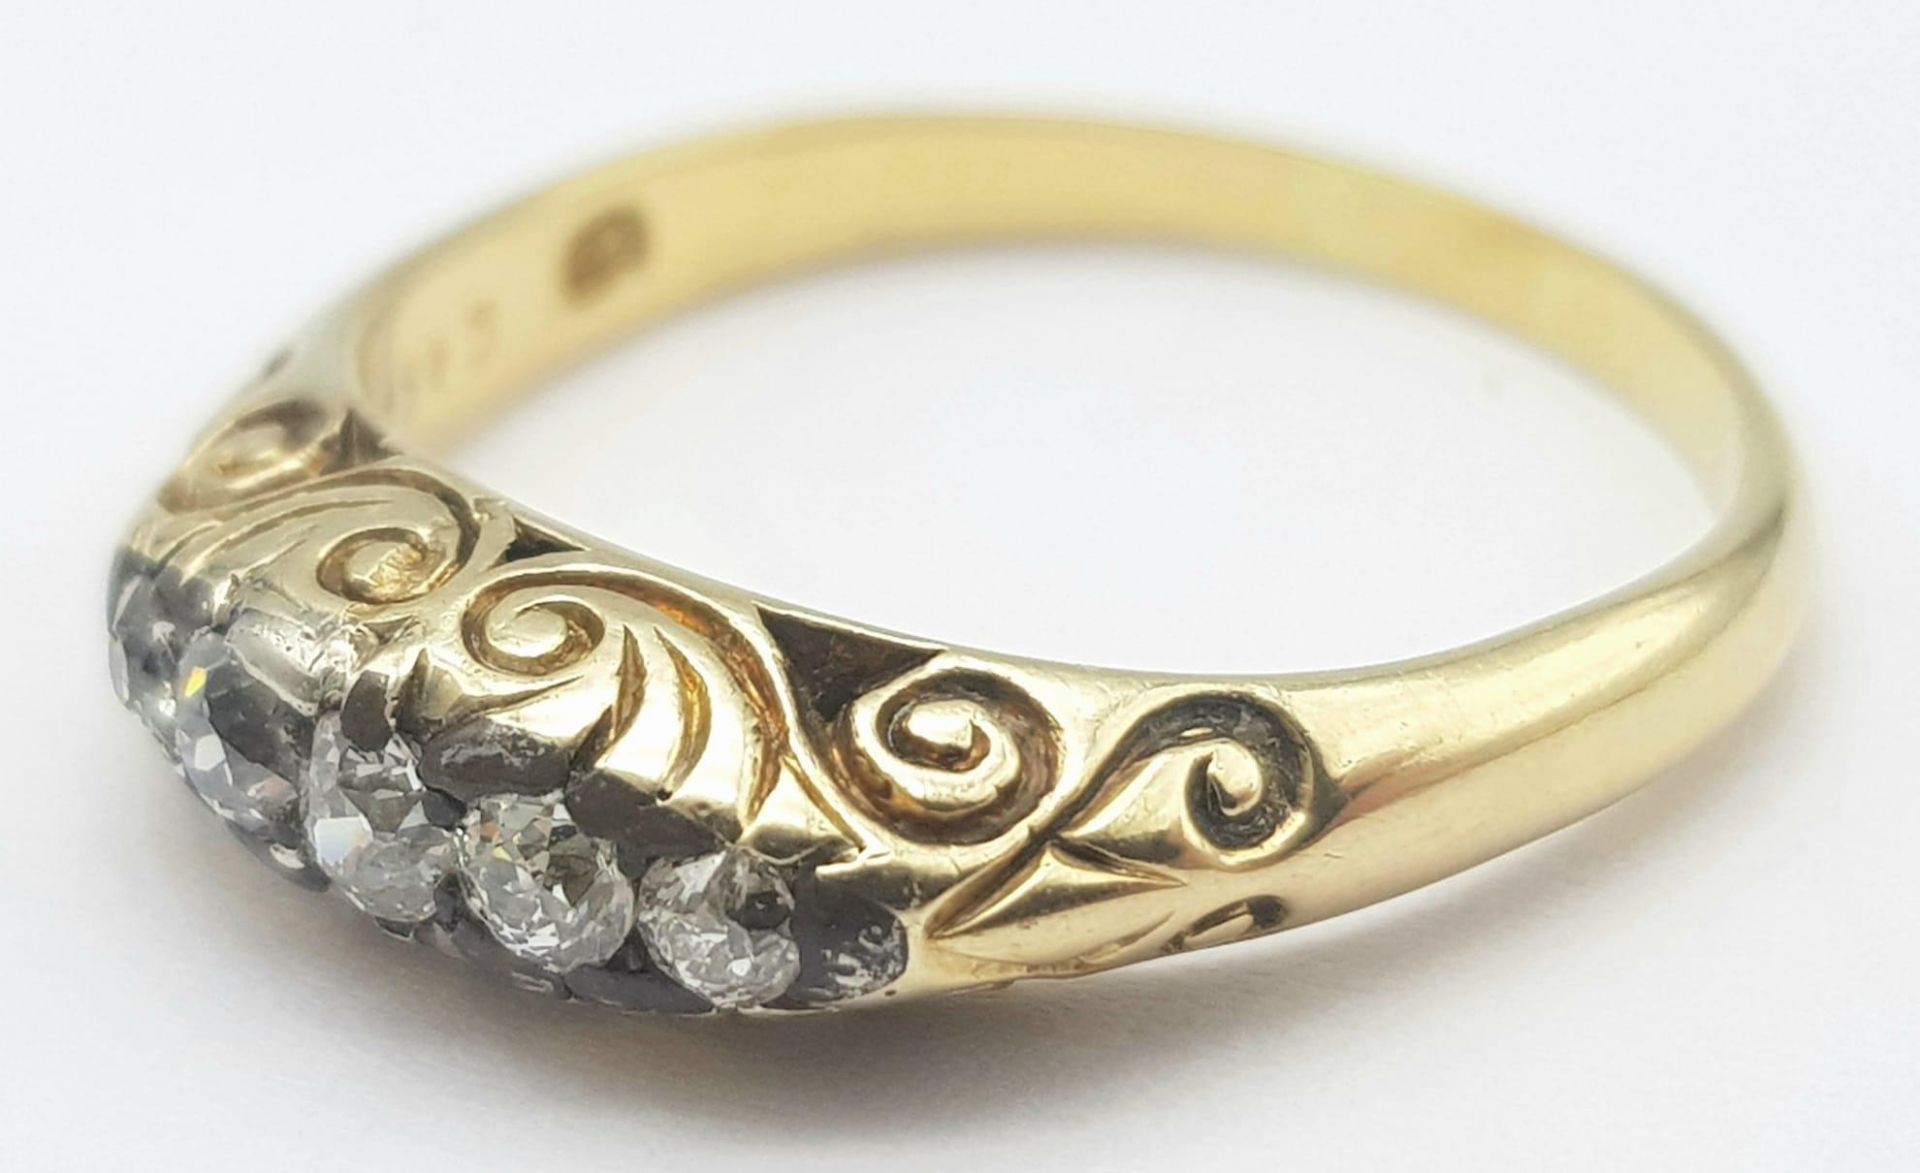 An 18K Yellow Gold Diamond Gypsy Ring. 0.15ctw diamonds. Size P. 4.9g total weight. - Image 2 of 5